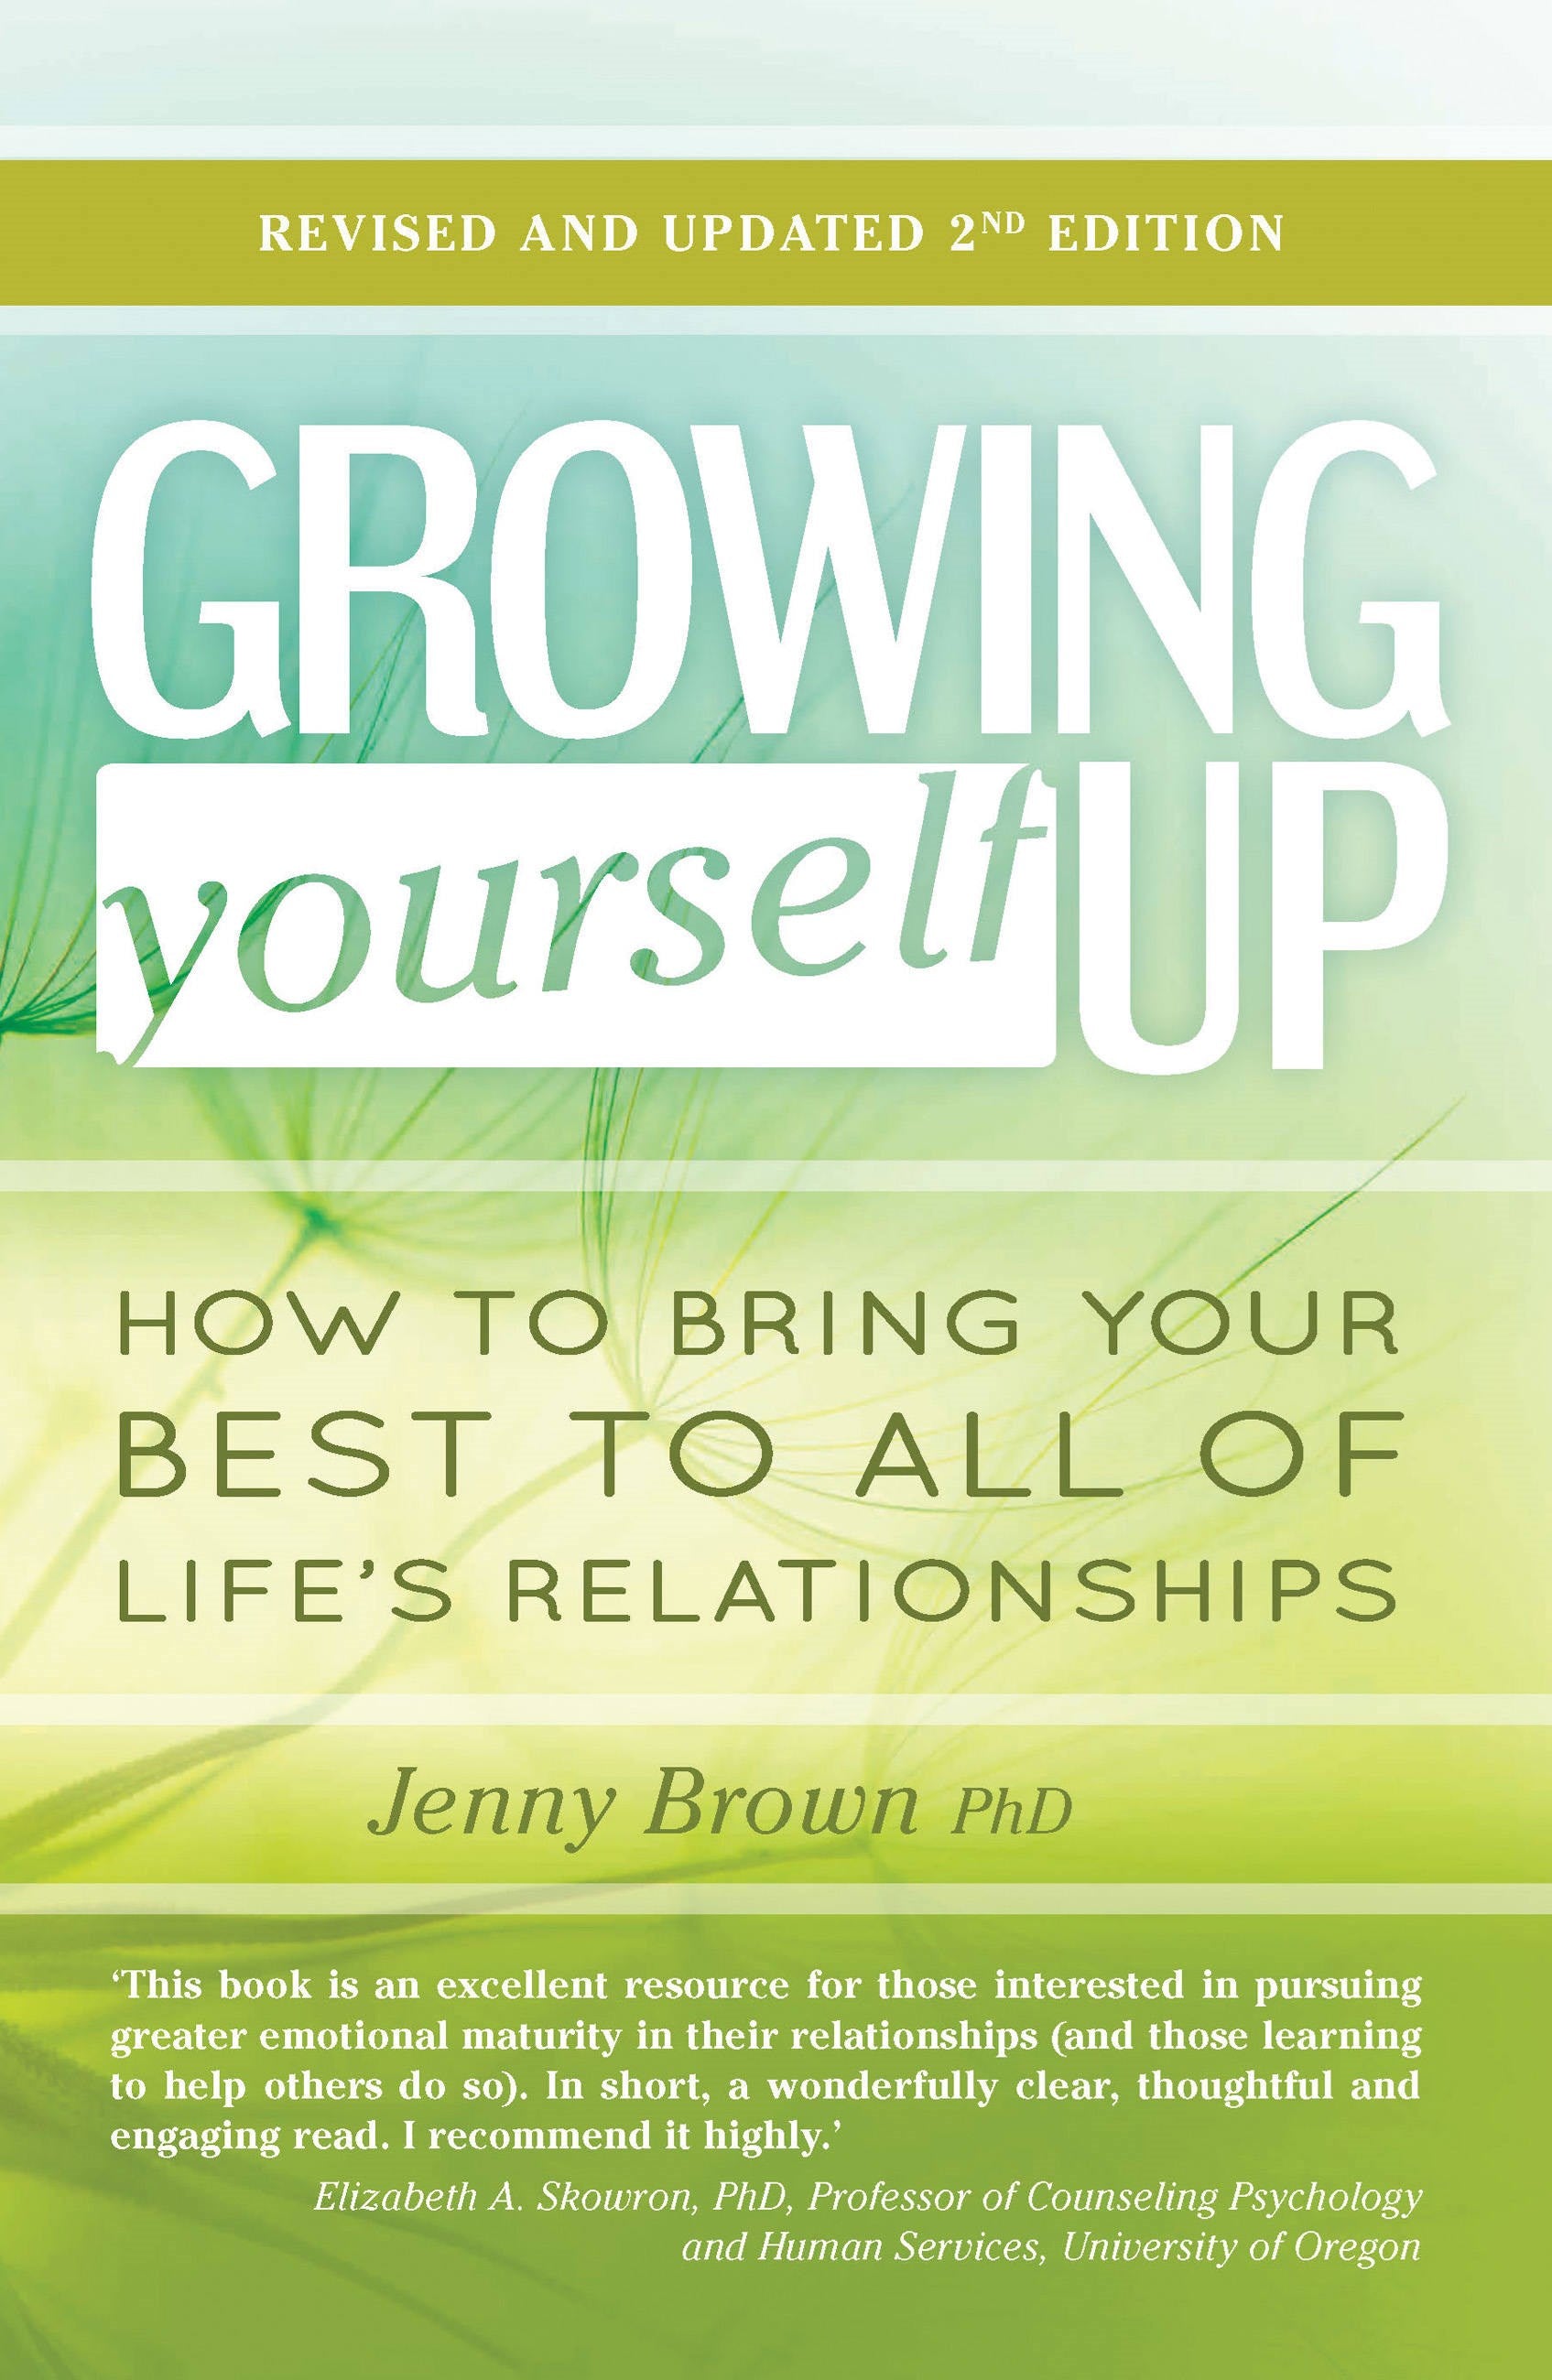 Growing Yourself Up: How to bring your best to all of life’s relationships (2nd Edition)